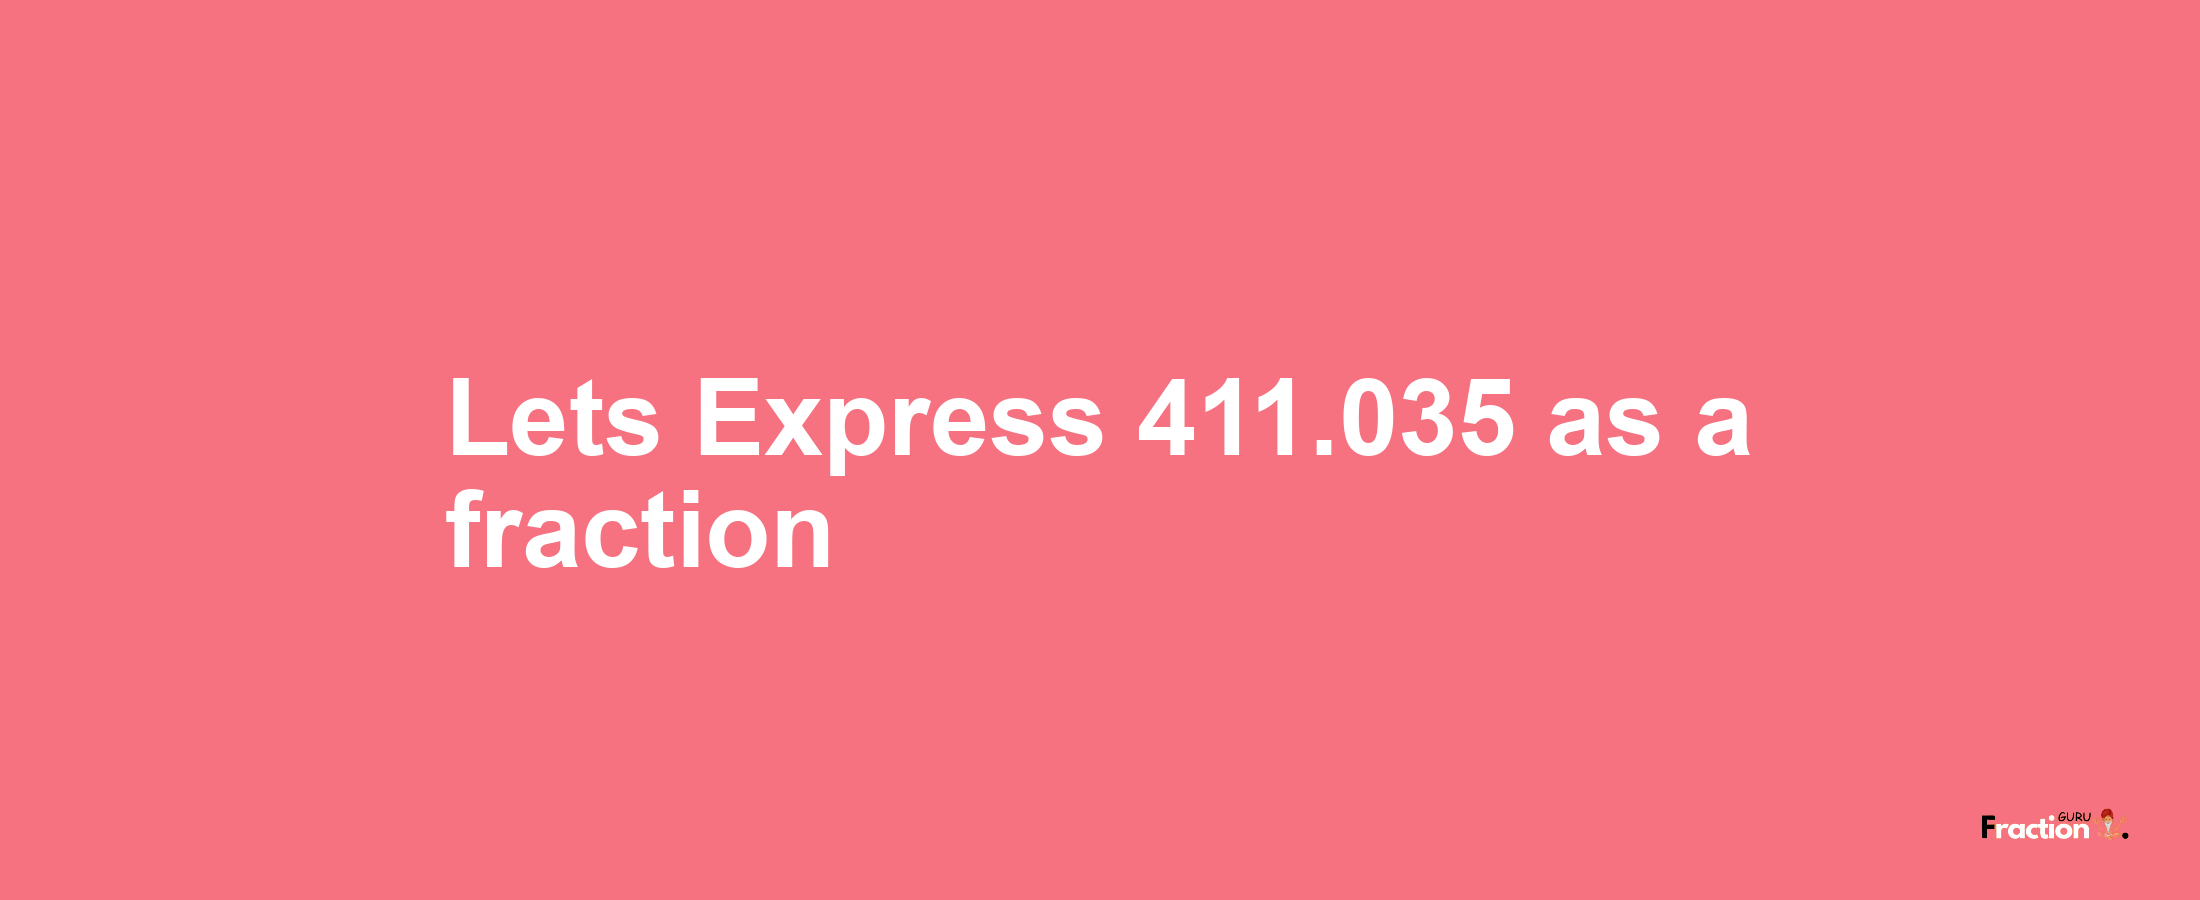 Lets Express 411.035 as afraction